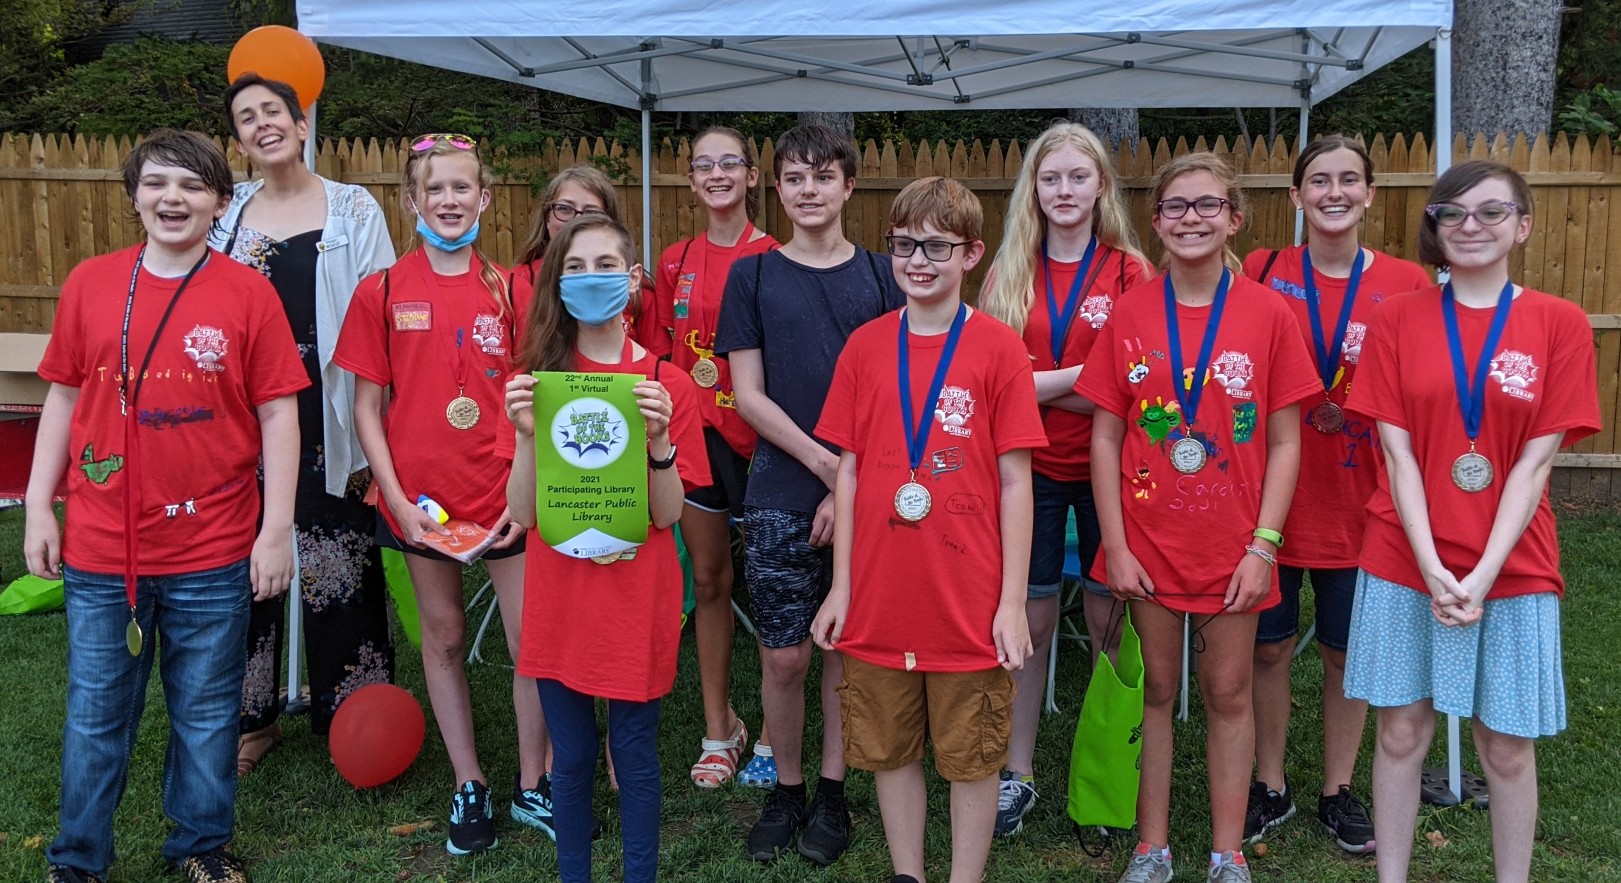 In 2021 the Lancaster Public Library teams were the Battle of the Books champions in our first ever virtual competition.